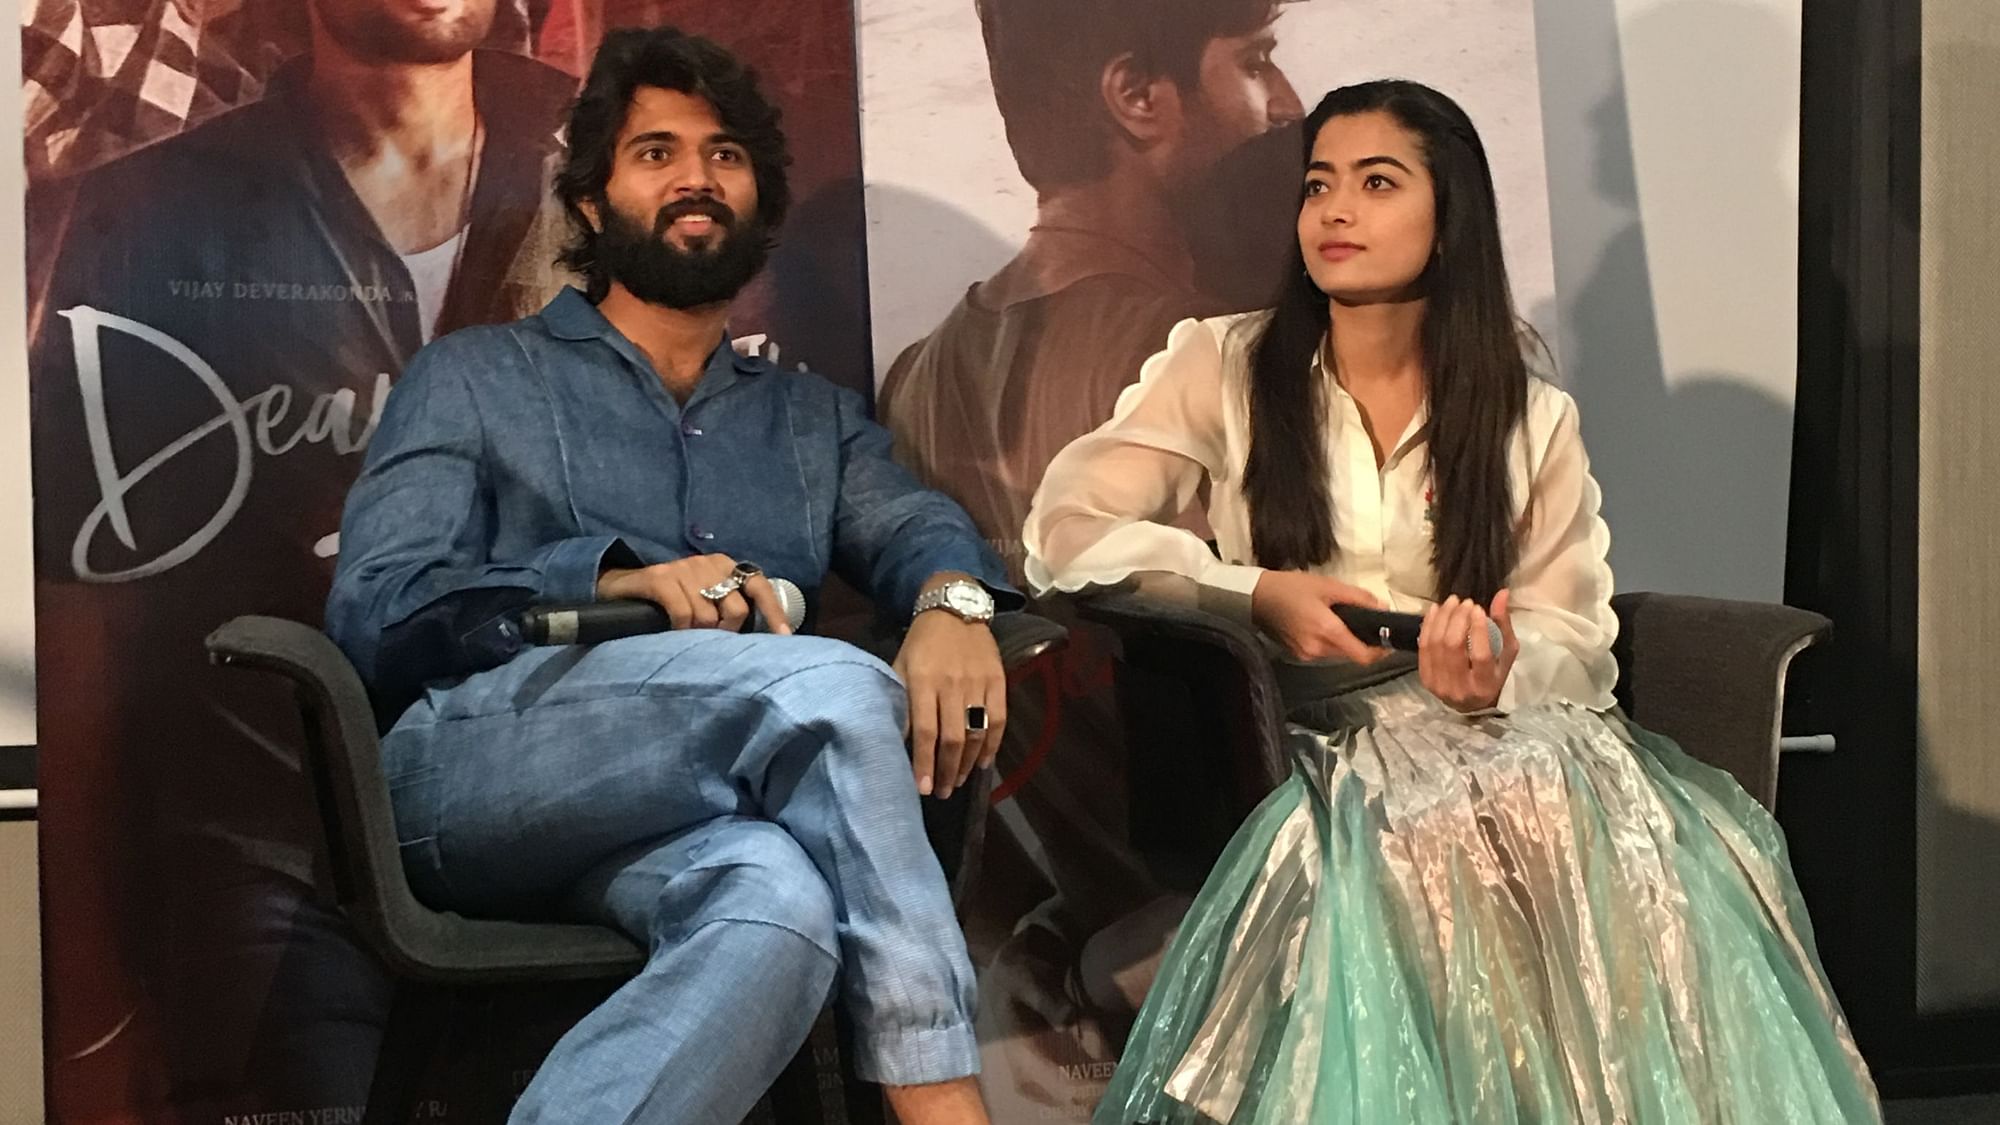 Actor Vijay Deverakonda speaks about what makes ‘Dear Comrade’ special and his plans to do another Tamil film.